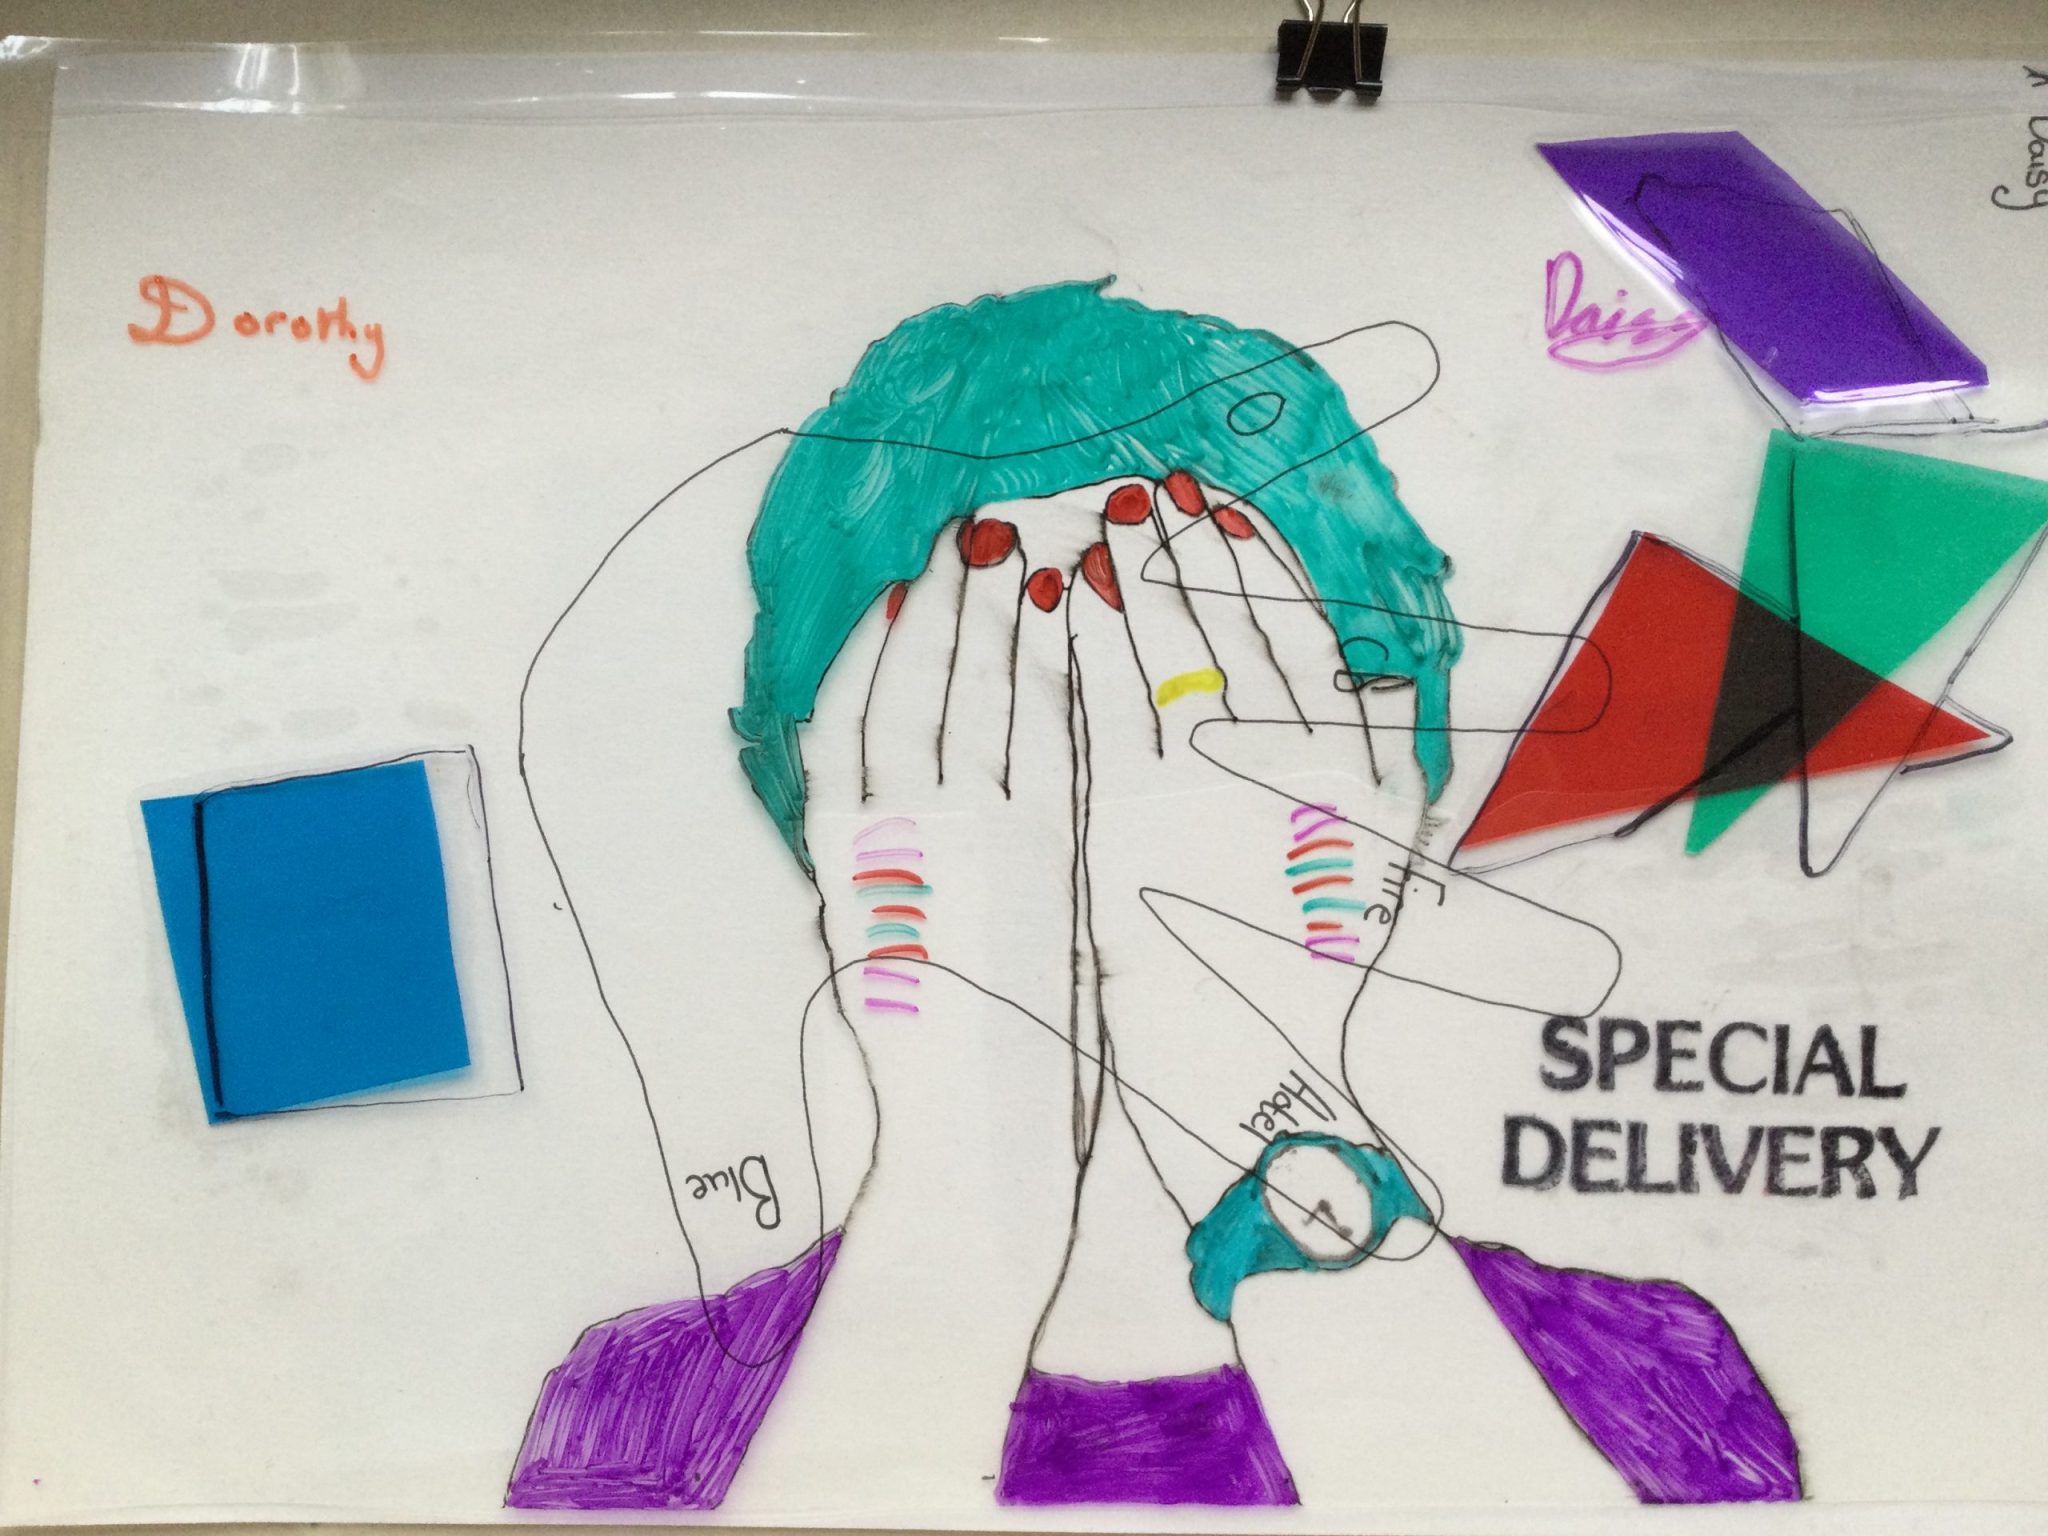 A colourful picture of a face, drawn on acetate